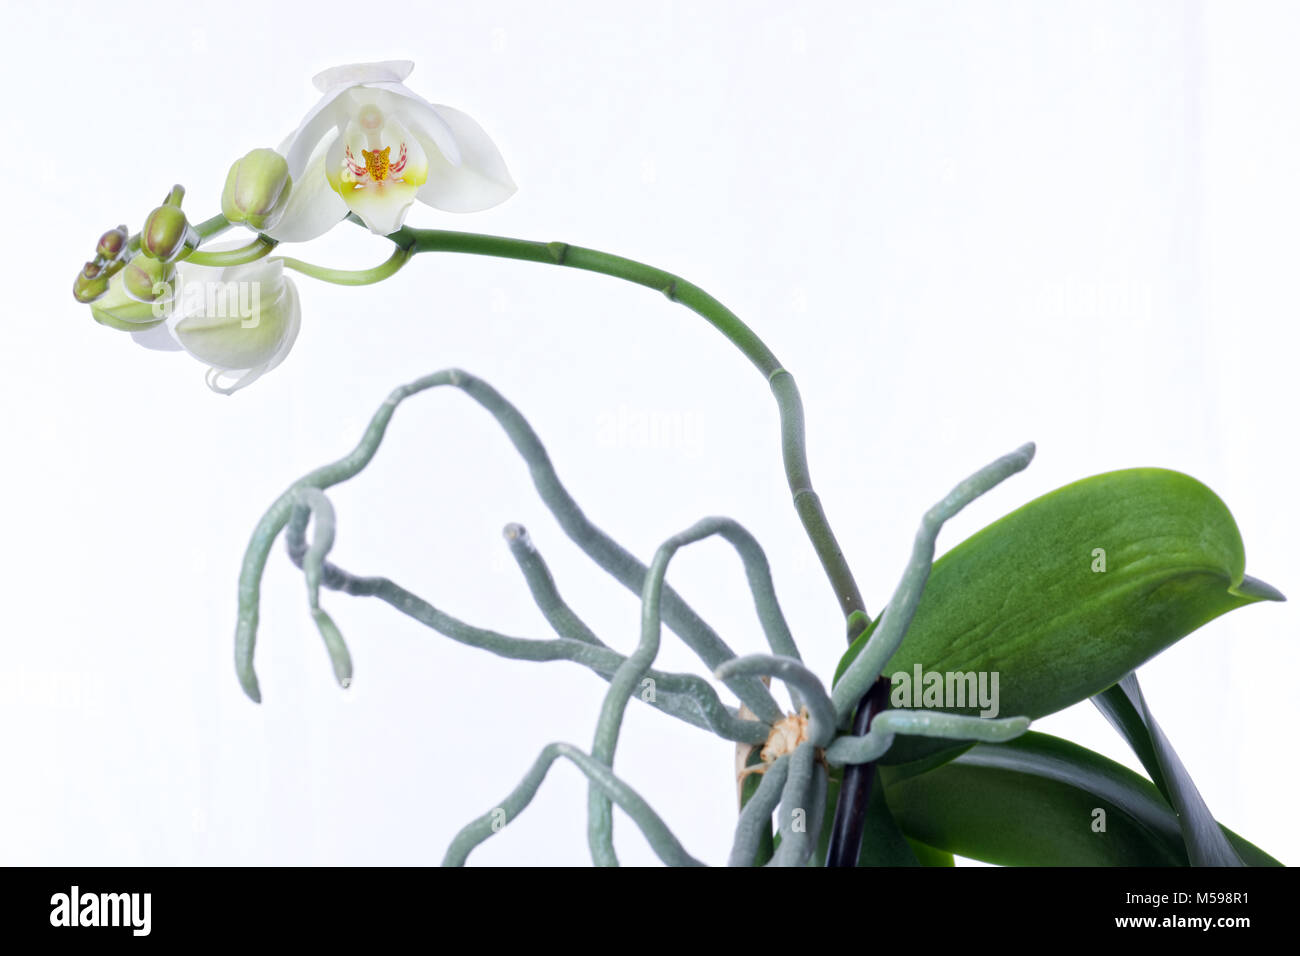 Spray of white and green flowers on a Phalaenopsis orchid plant and aerial roots growing in a white clay pot isolated on a white background. Stock Photo